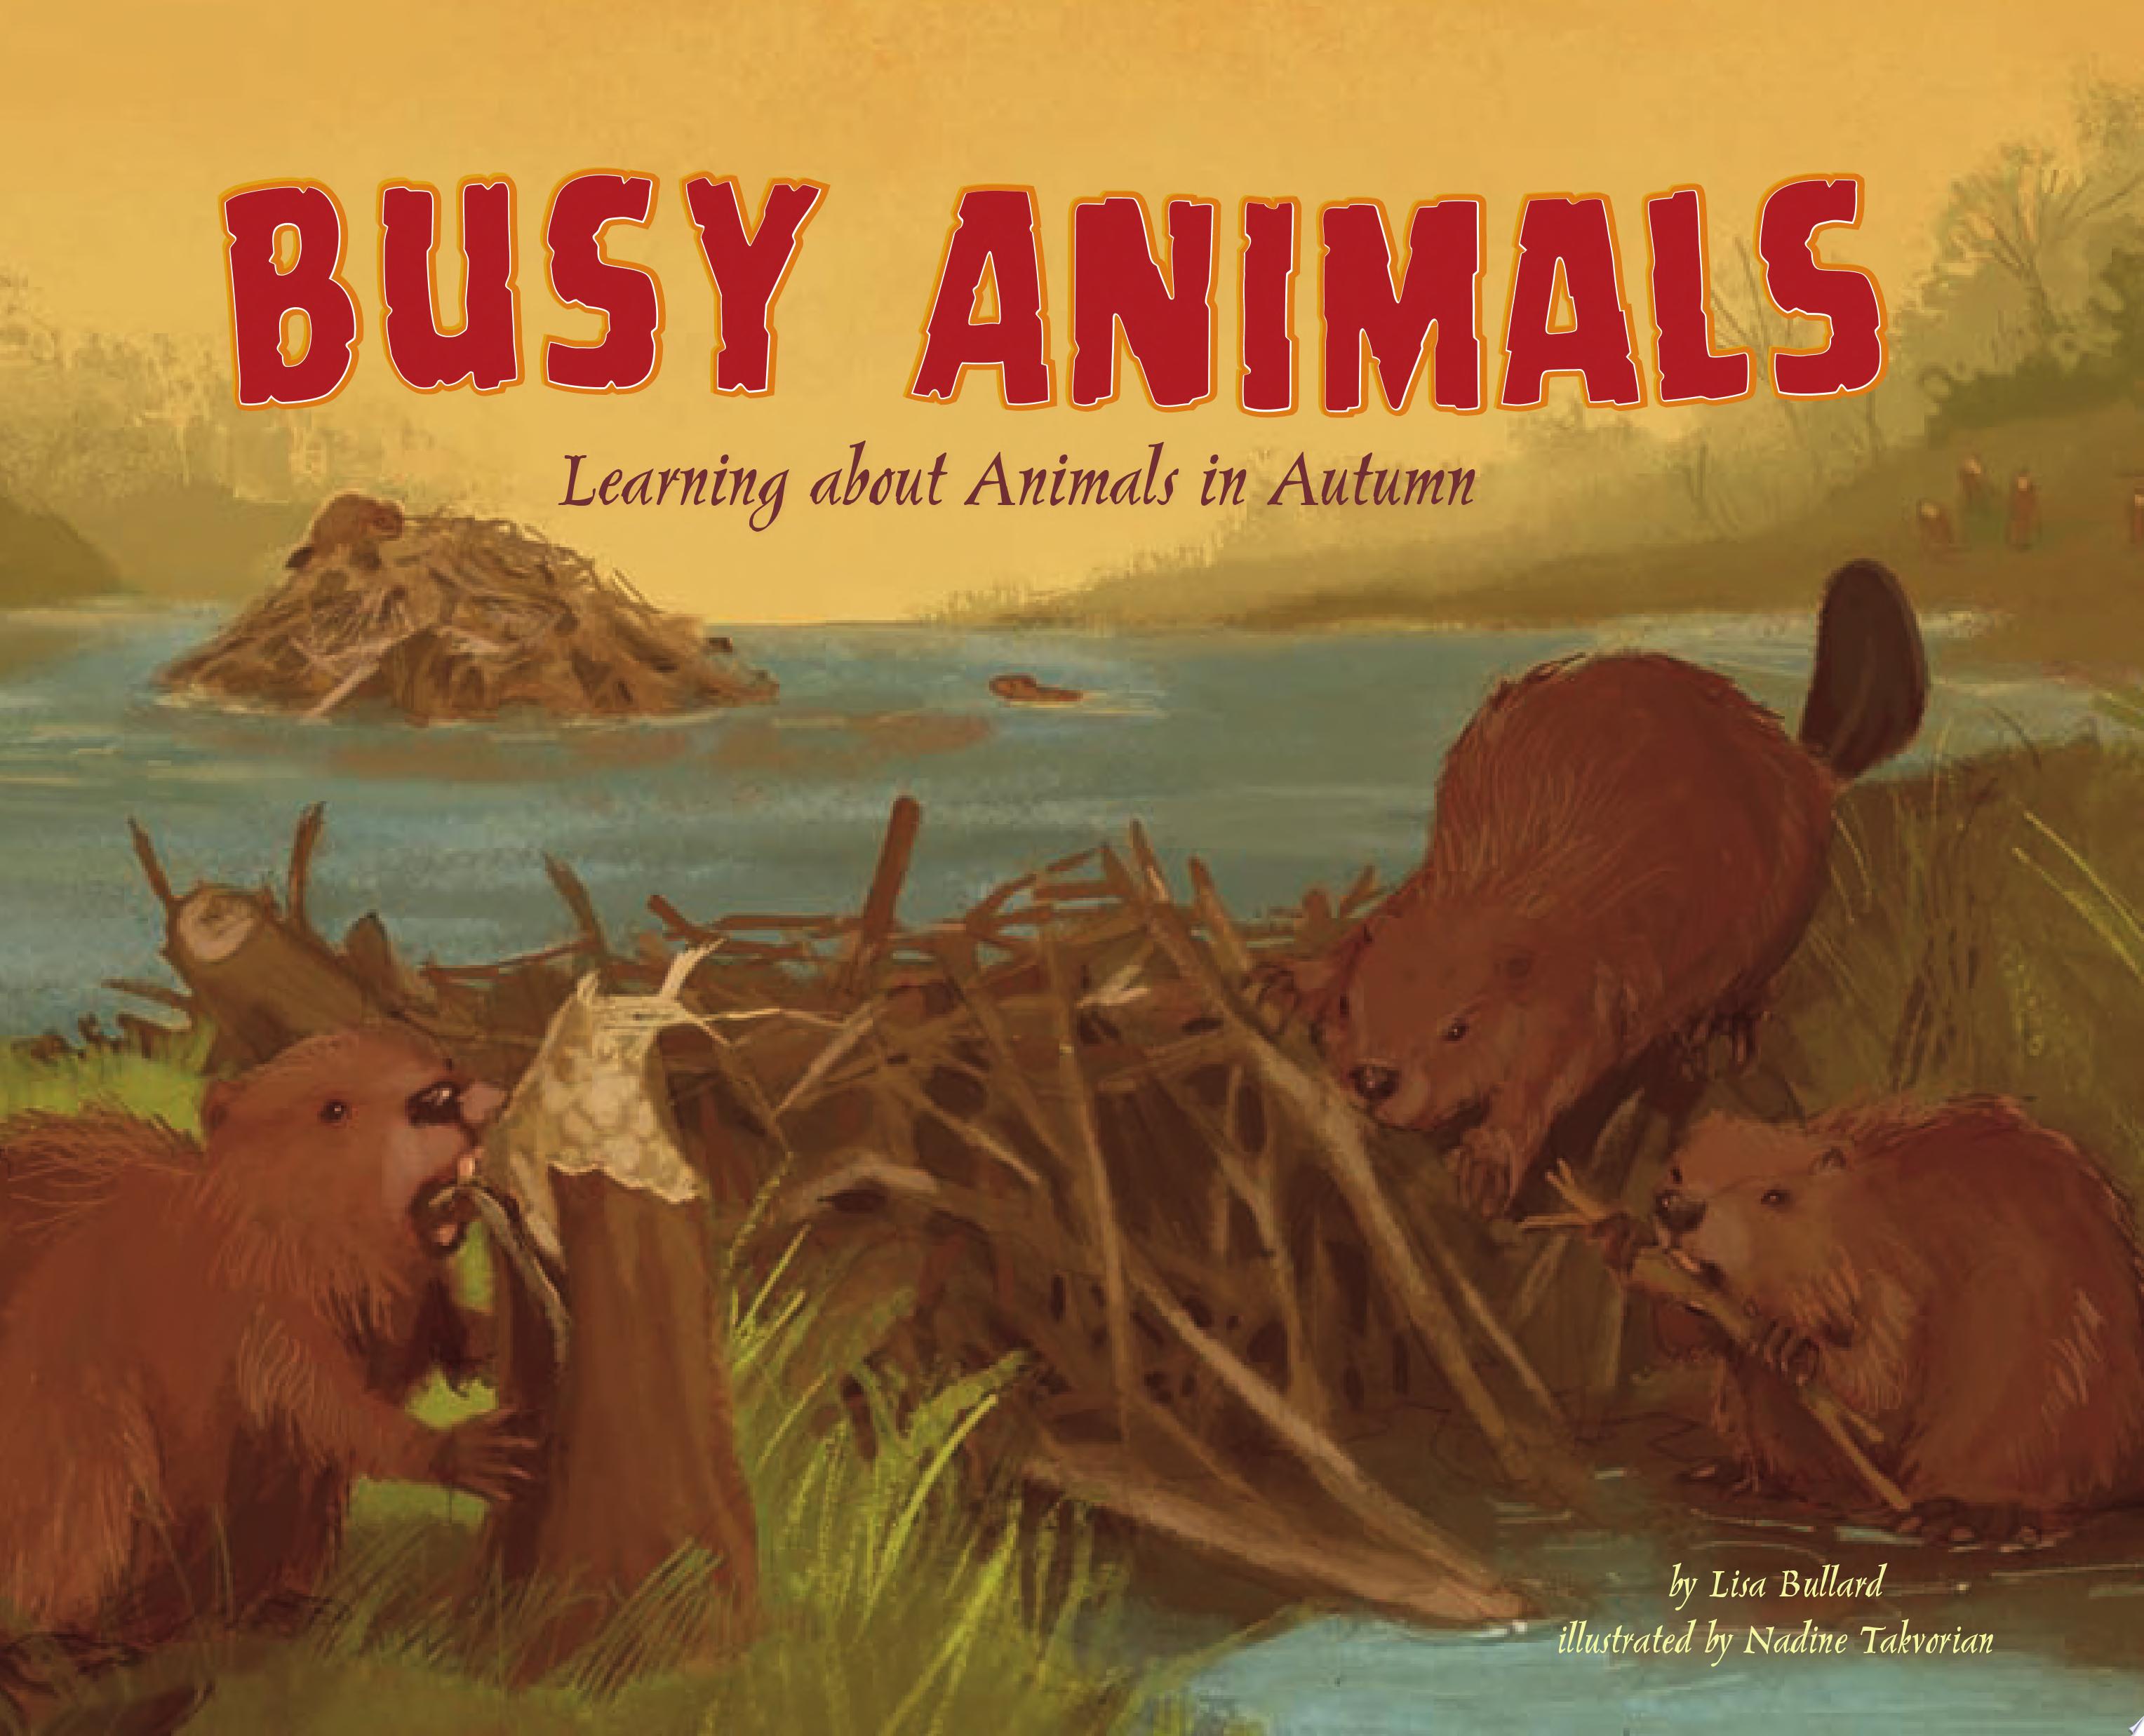 Image for "Busy Animals"